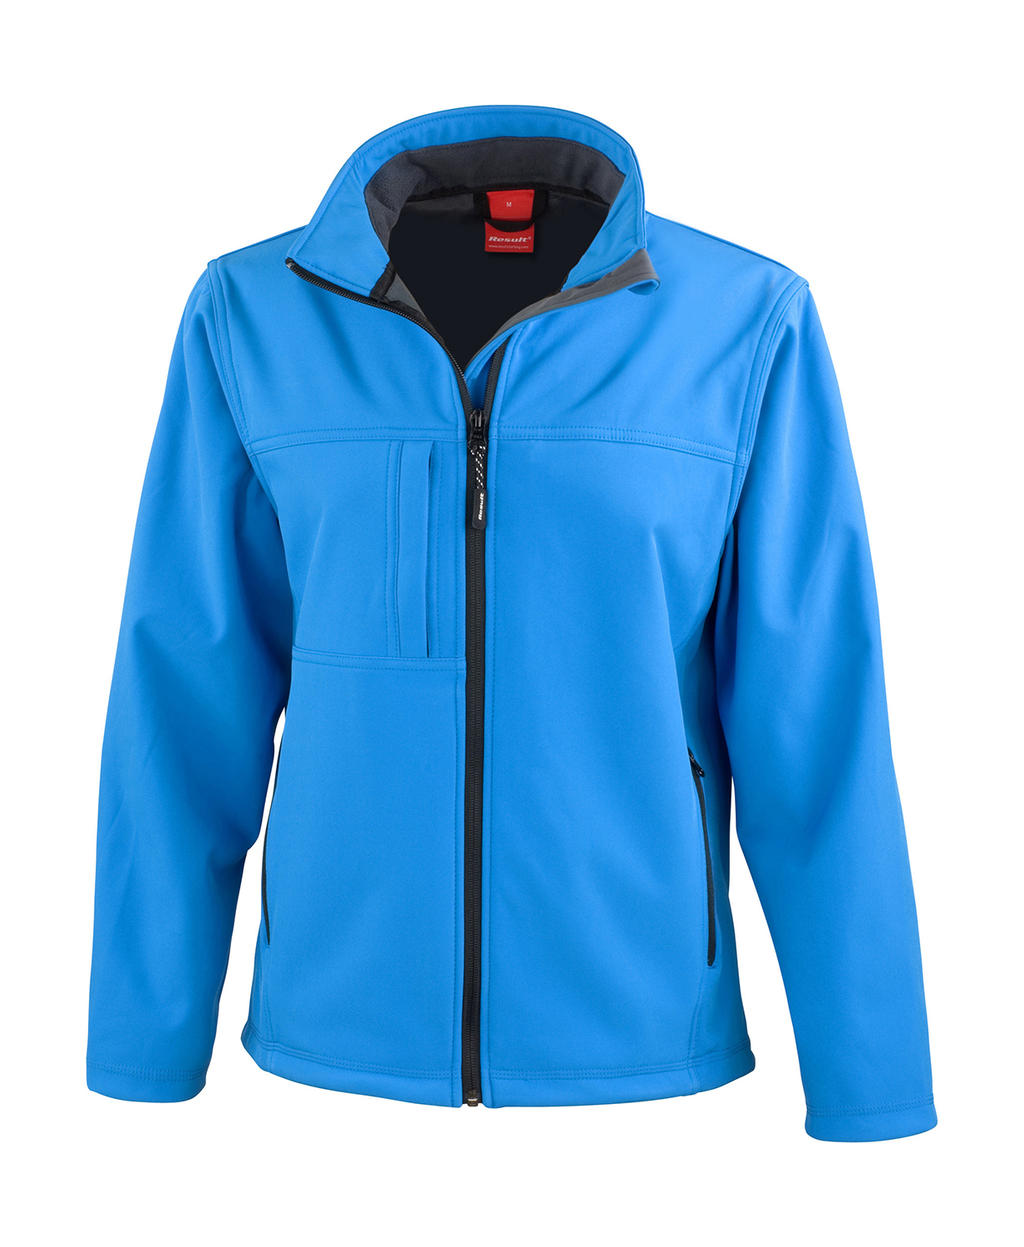  Ladies Classic Softshell Jacket in Farbe Azure